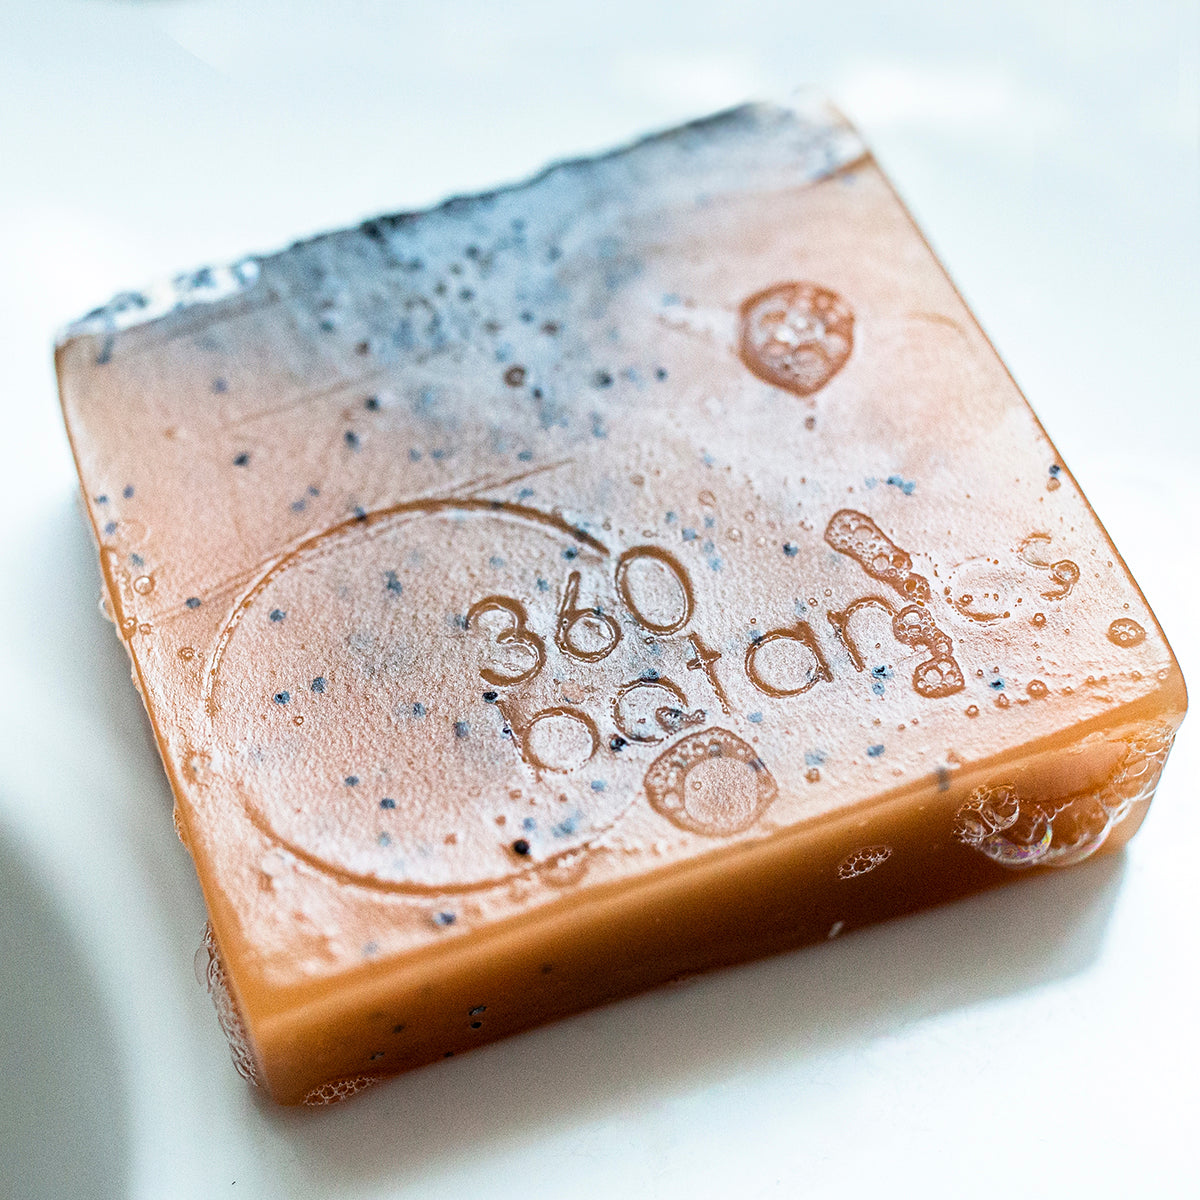 A close-up of a wet 360 Botanics soap bar with the brand logo embossed on its surface, surrounded by delicate bubbles and specks of botanical ingredients. The soap's rich terracotta hue is complemented by a marbled blue top, creating a luxurious and organic aesthetic